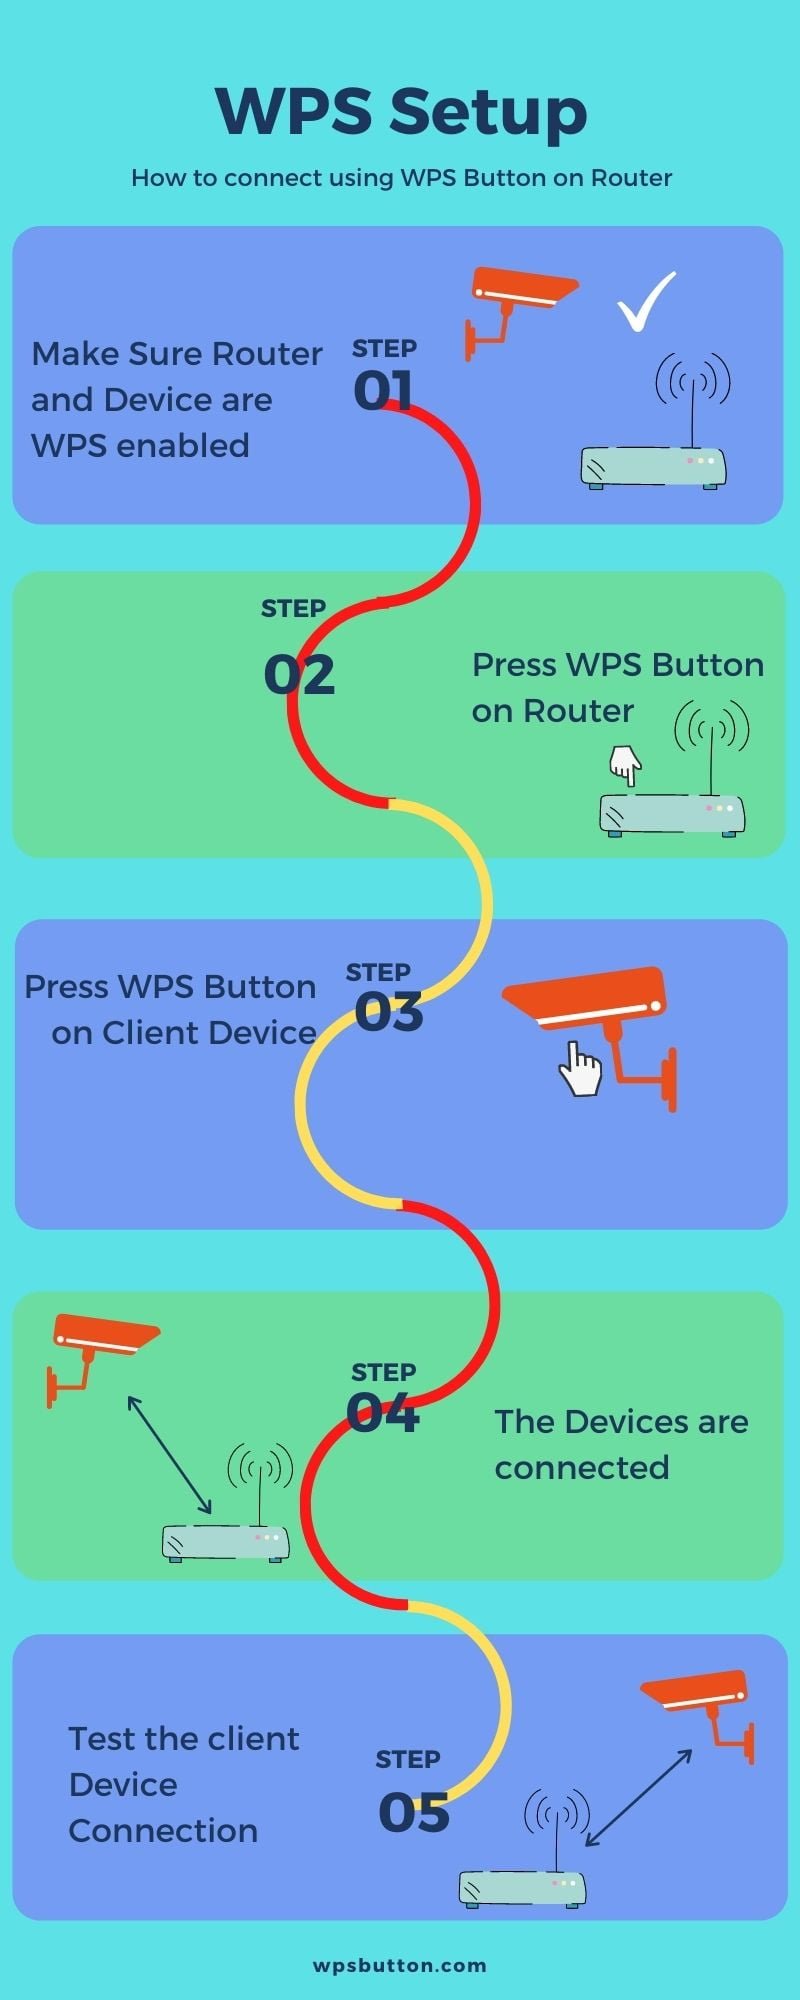 WPS-Button-on-router-setup